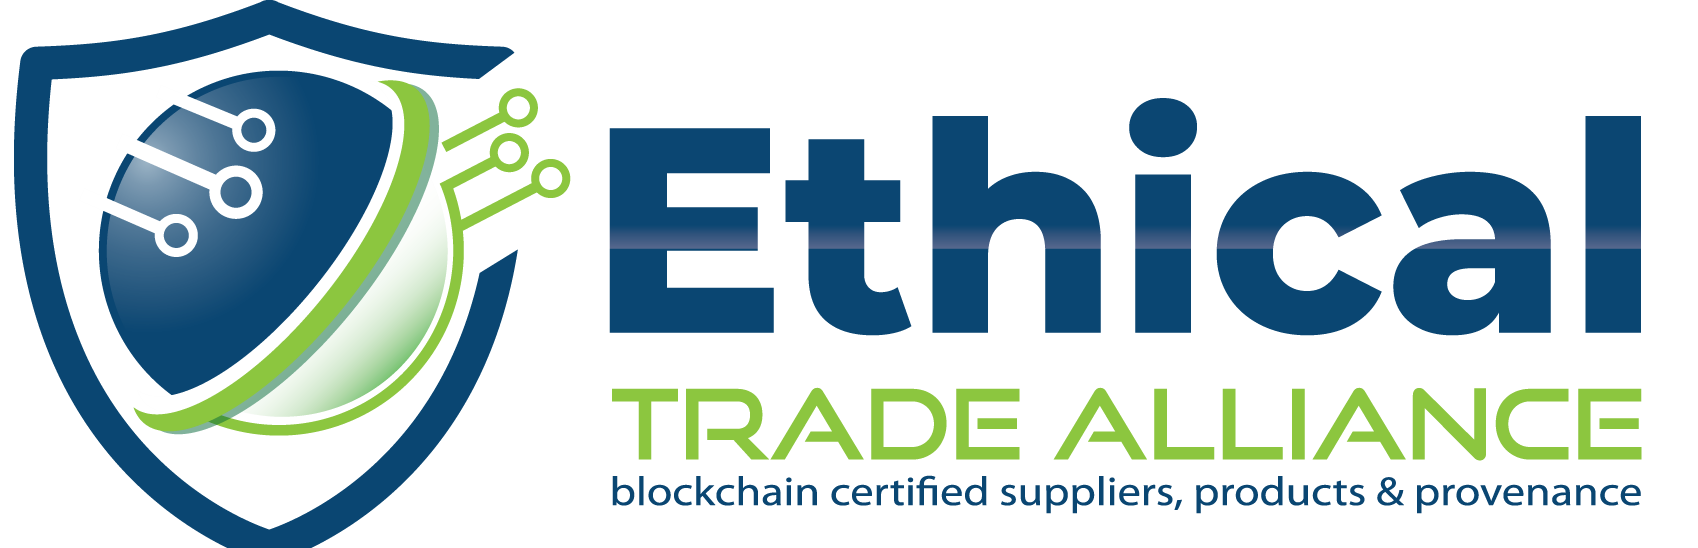 Ethical-Trade-Alliance_1_final_05092019_1-1